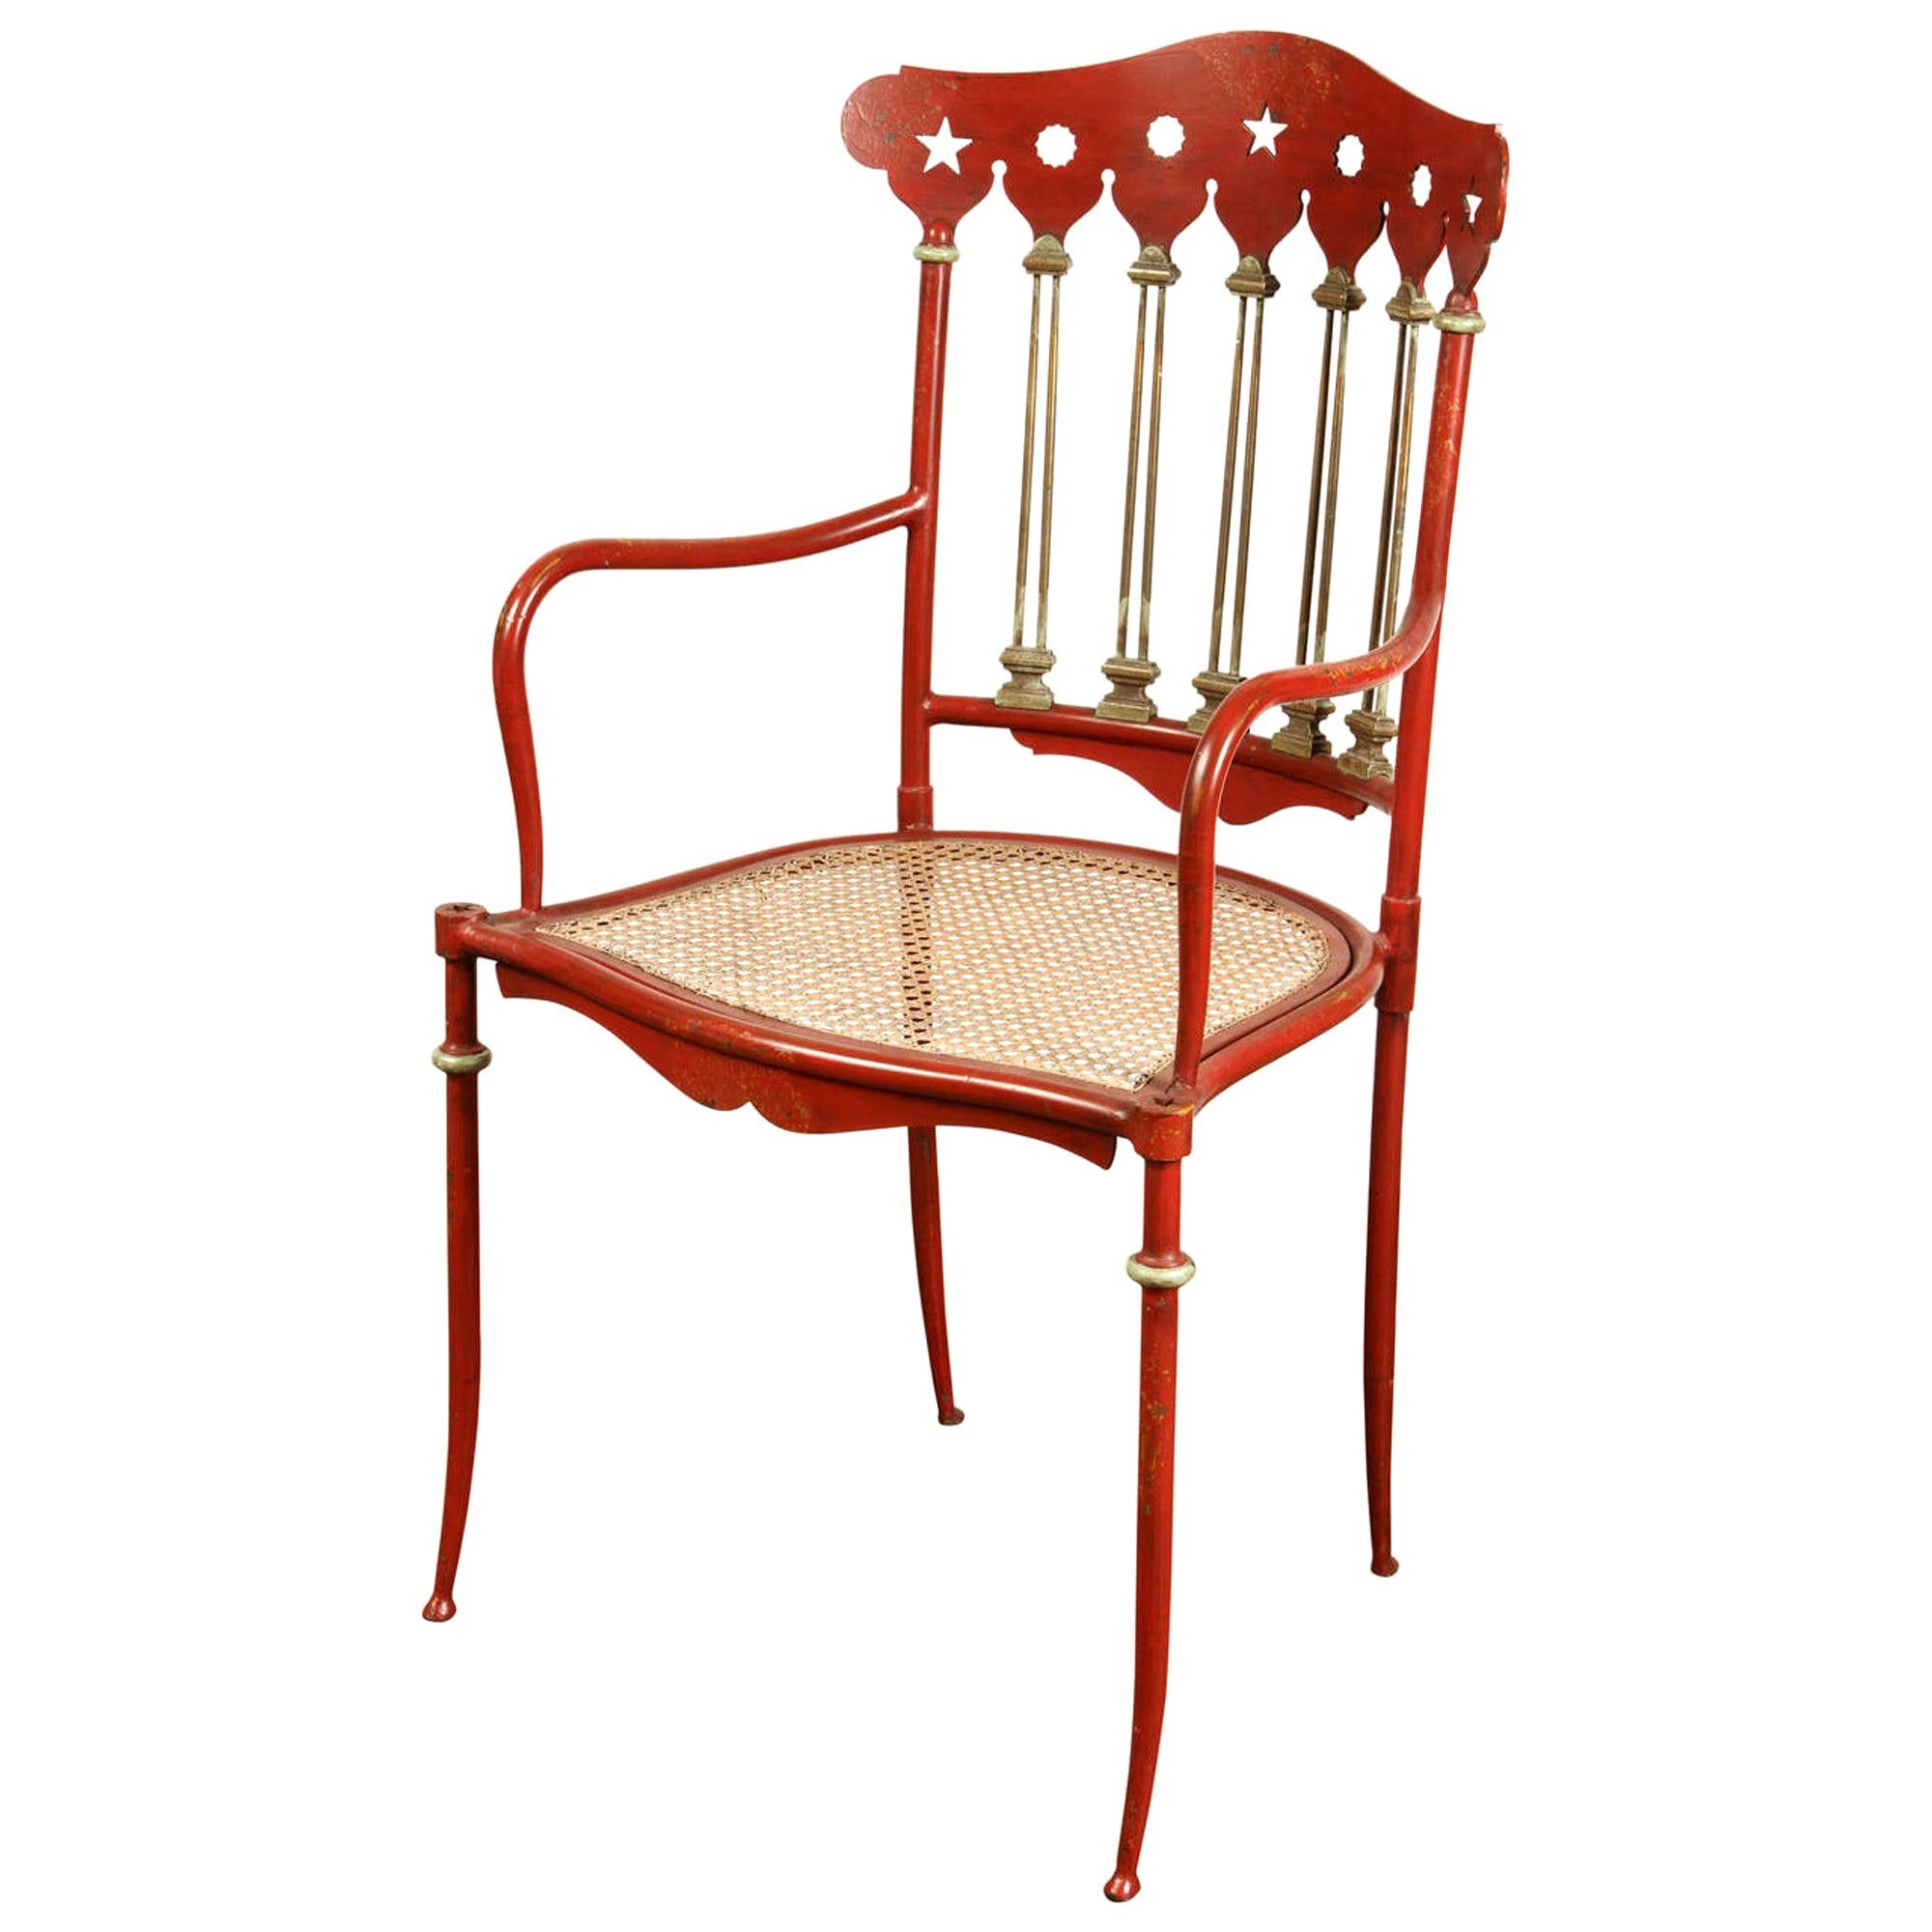 Early 20th Century Austrian Painted Iron and Cane Chair